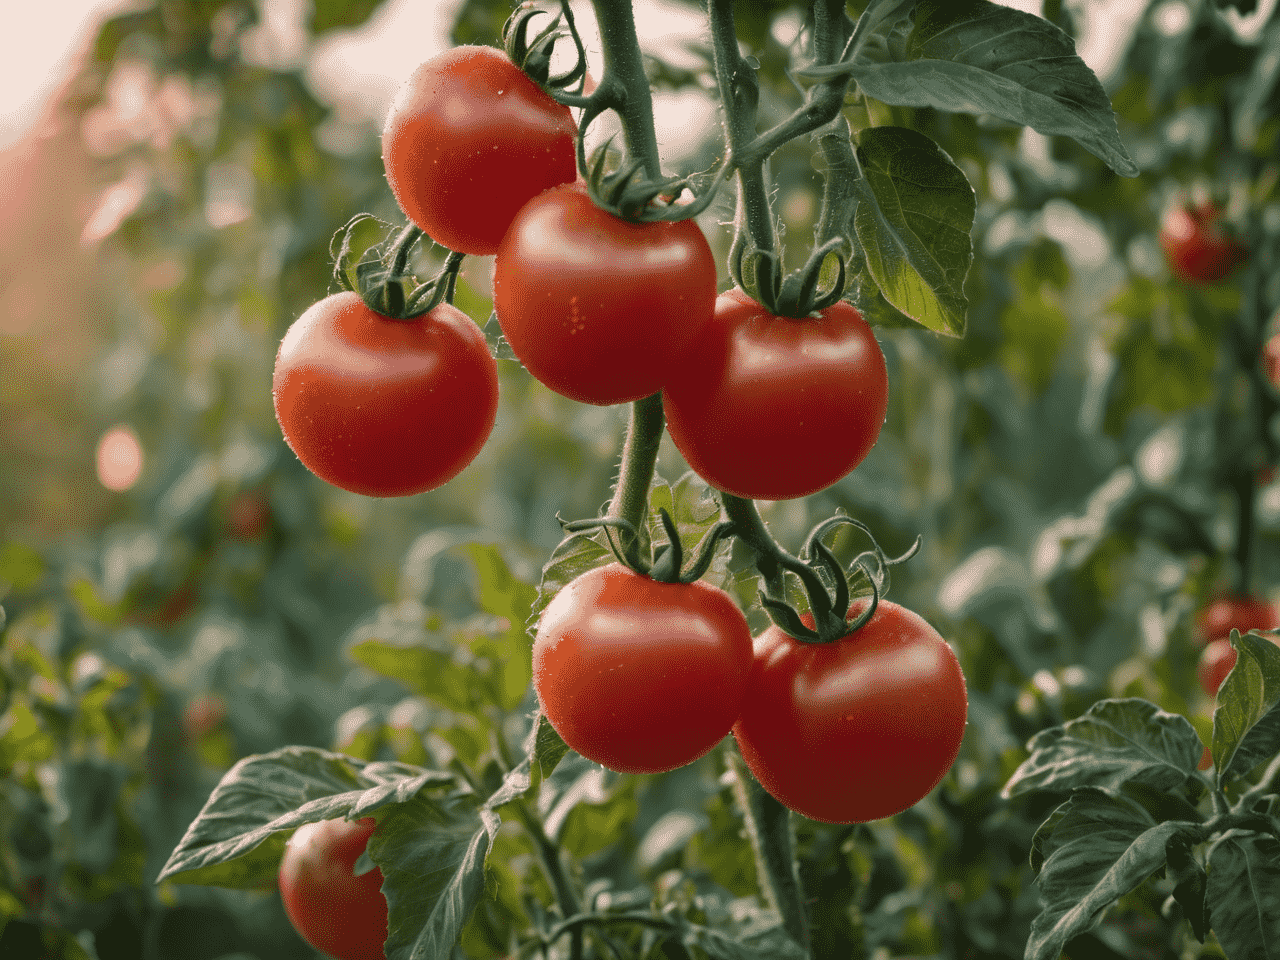 A vibrant tomato plant thrives in a sun-drenched garden, its emerald leaves contrasting with clusters of ripe red fruit.